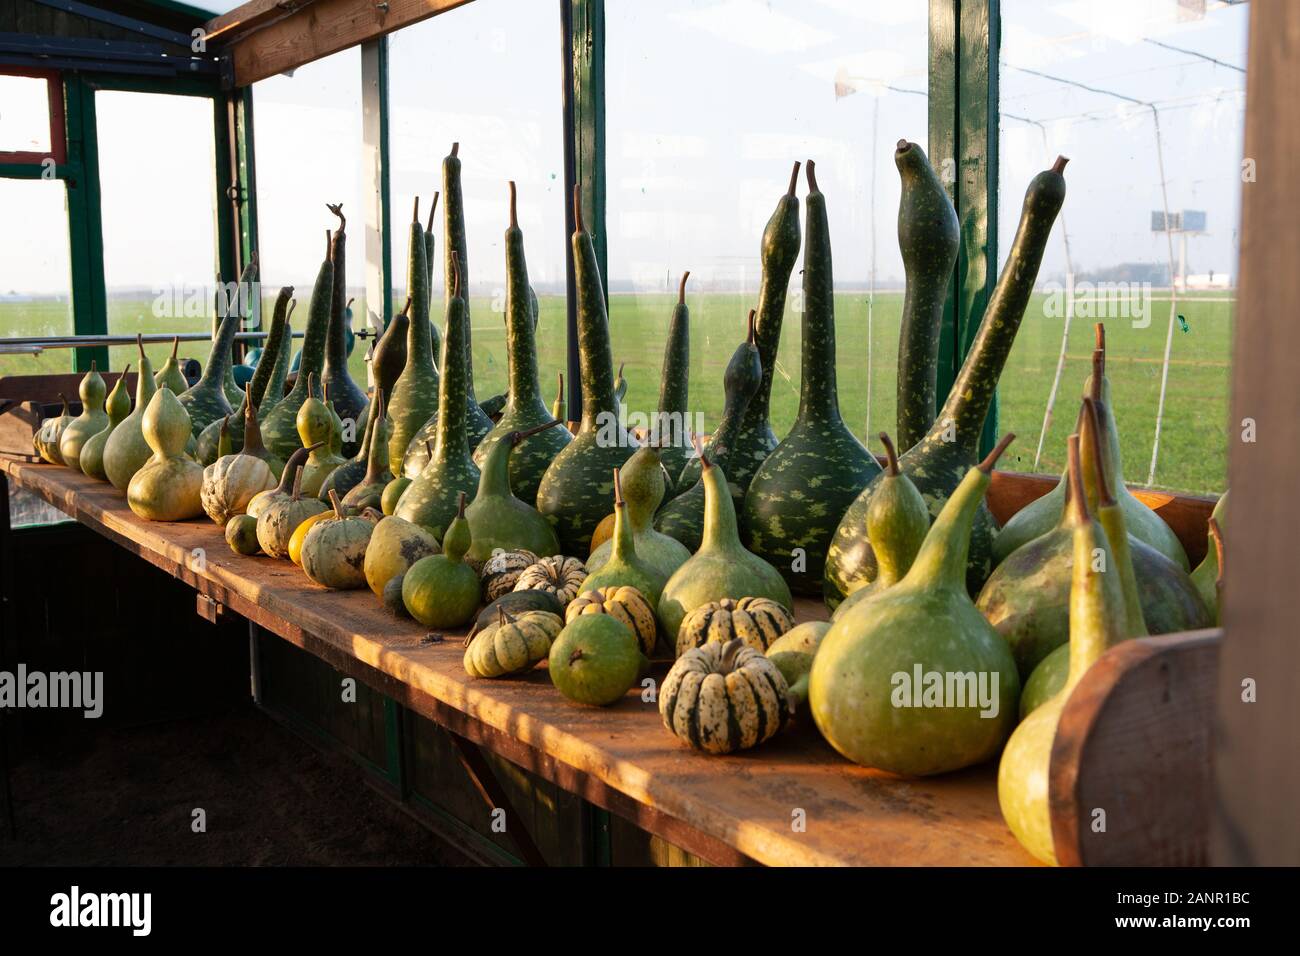 Calabash, grown in a greenhouse. Large green gourds, various types. Stock Photo